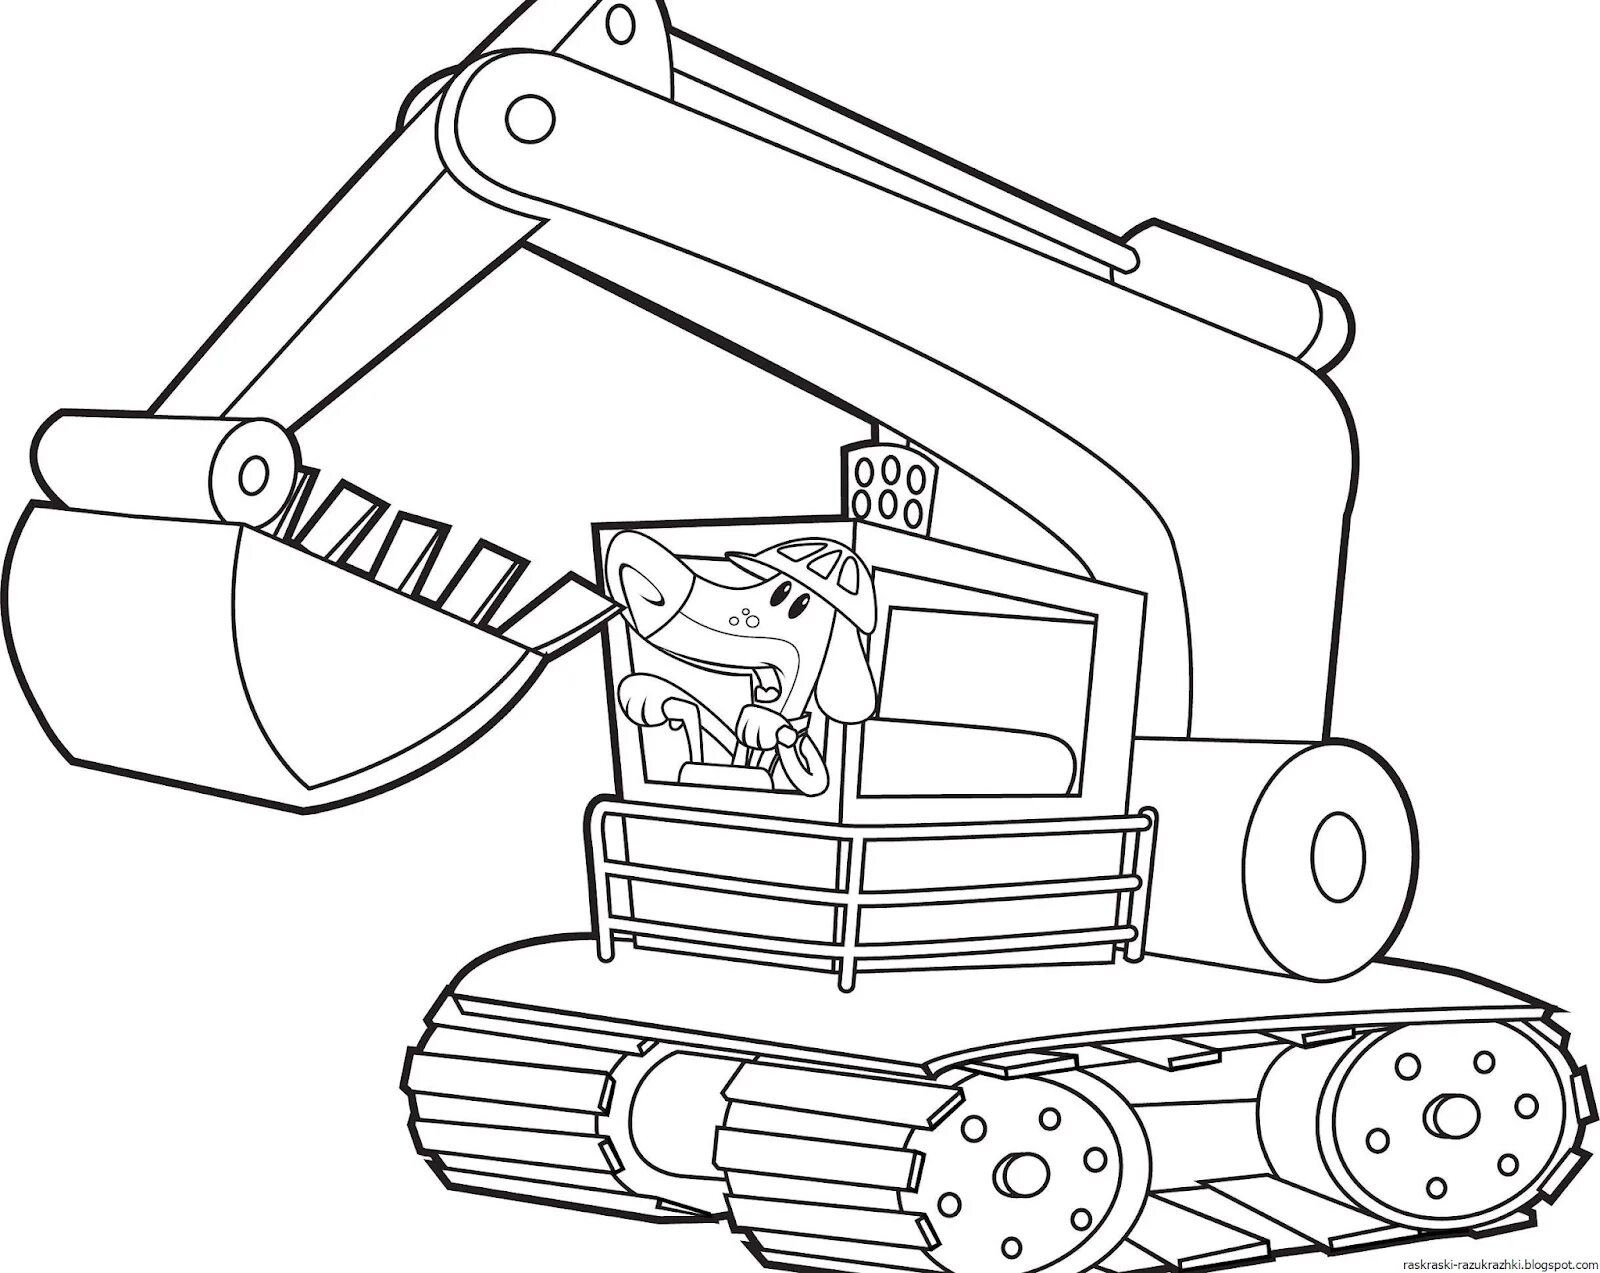 Incredible excavator coloring book for 4-5 year olds